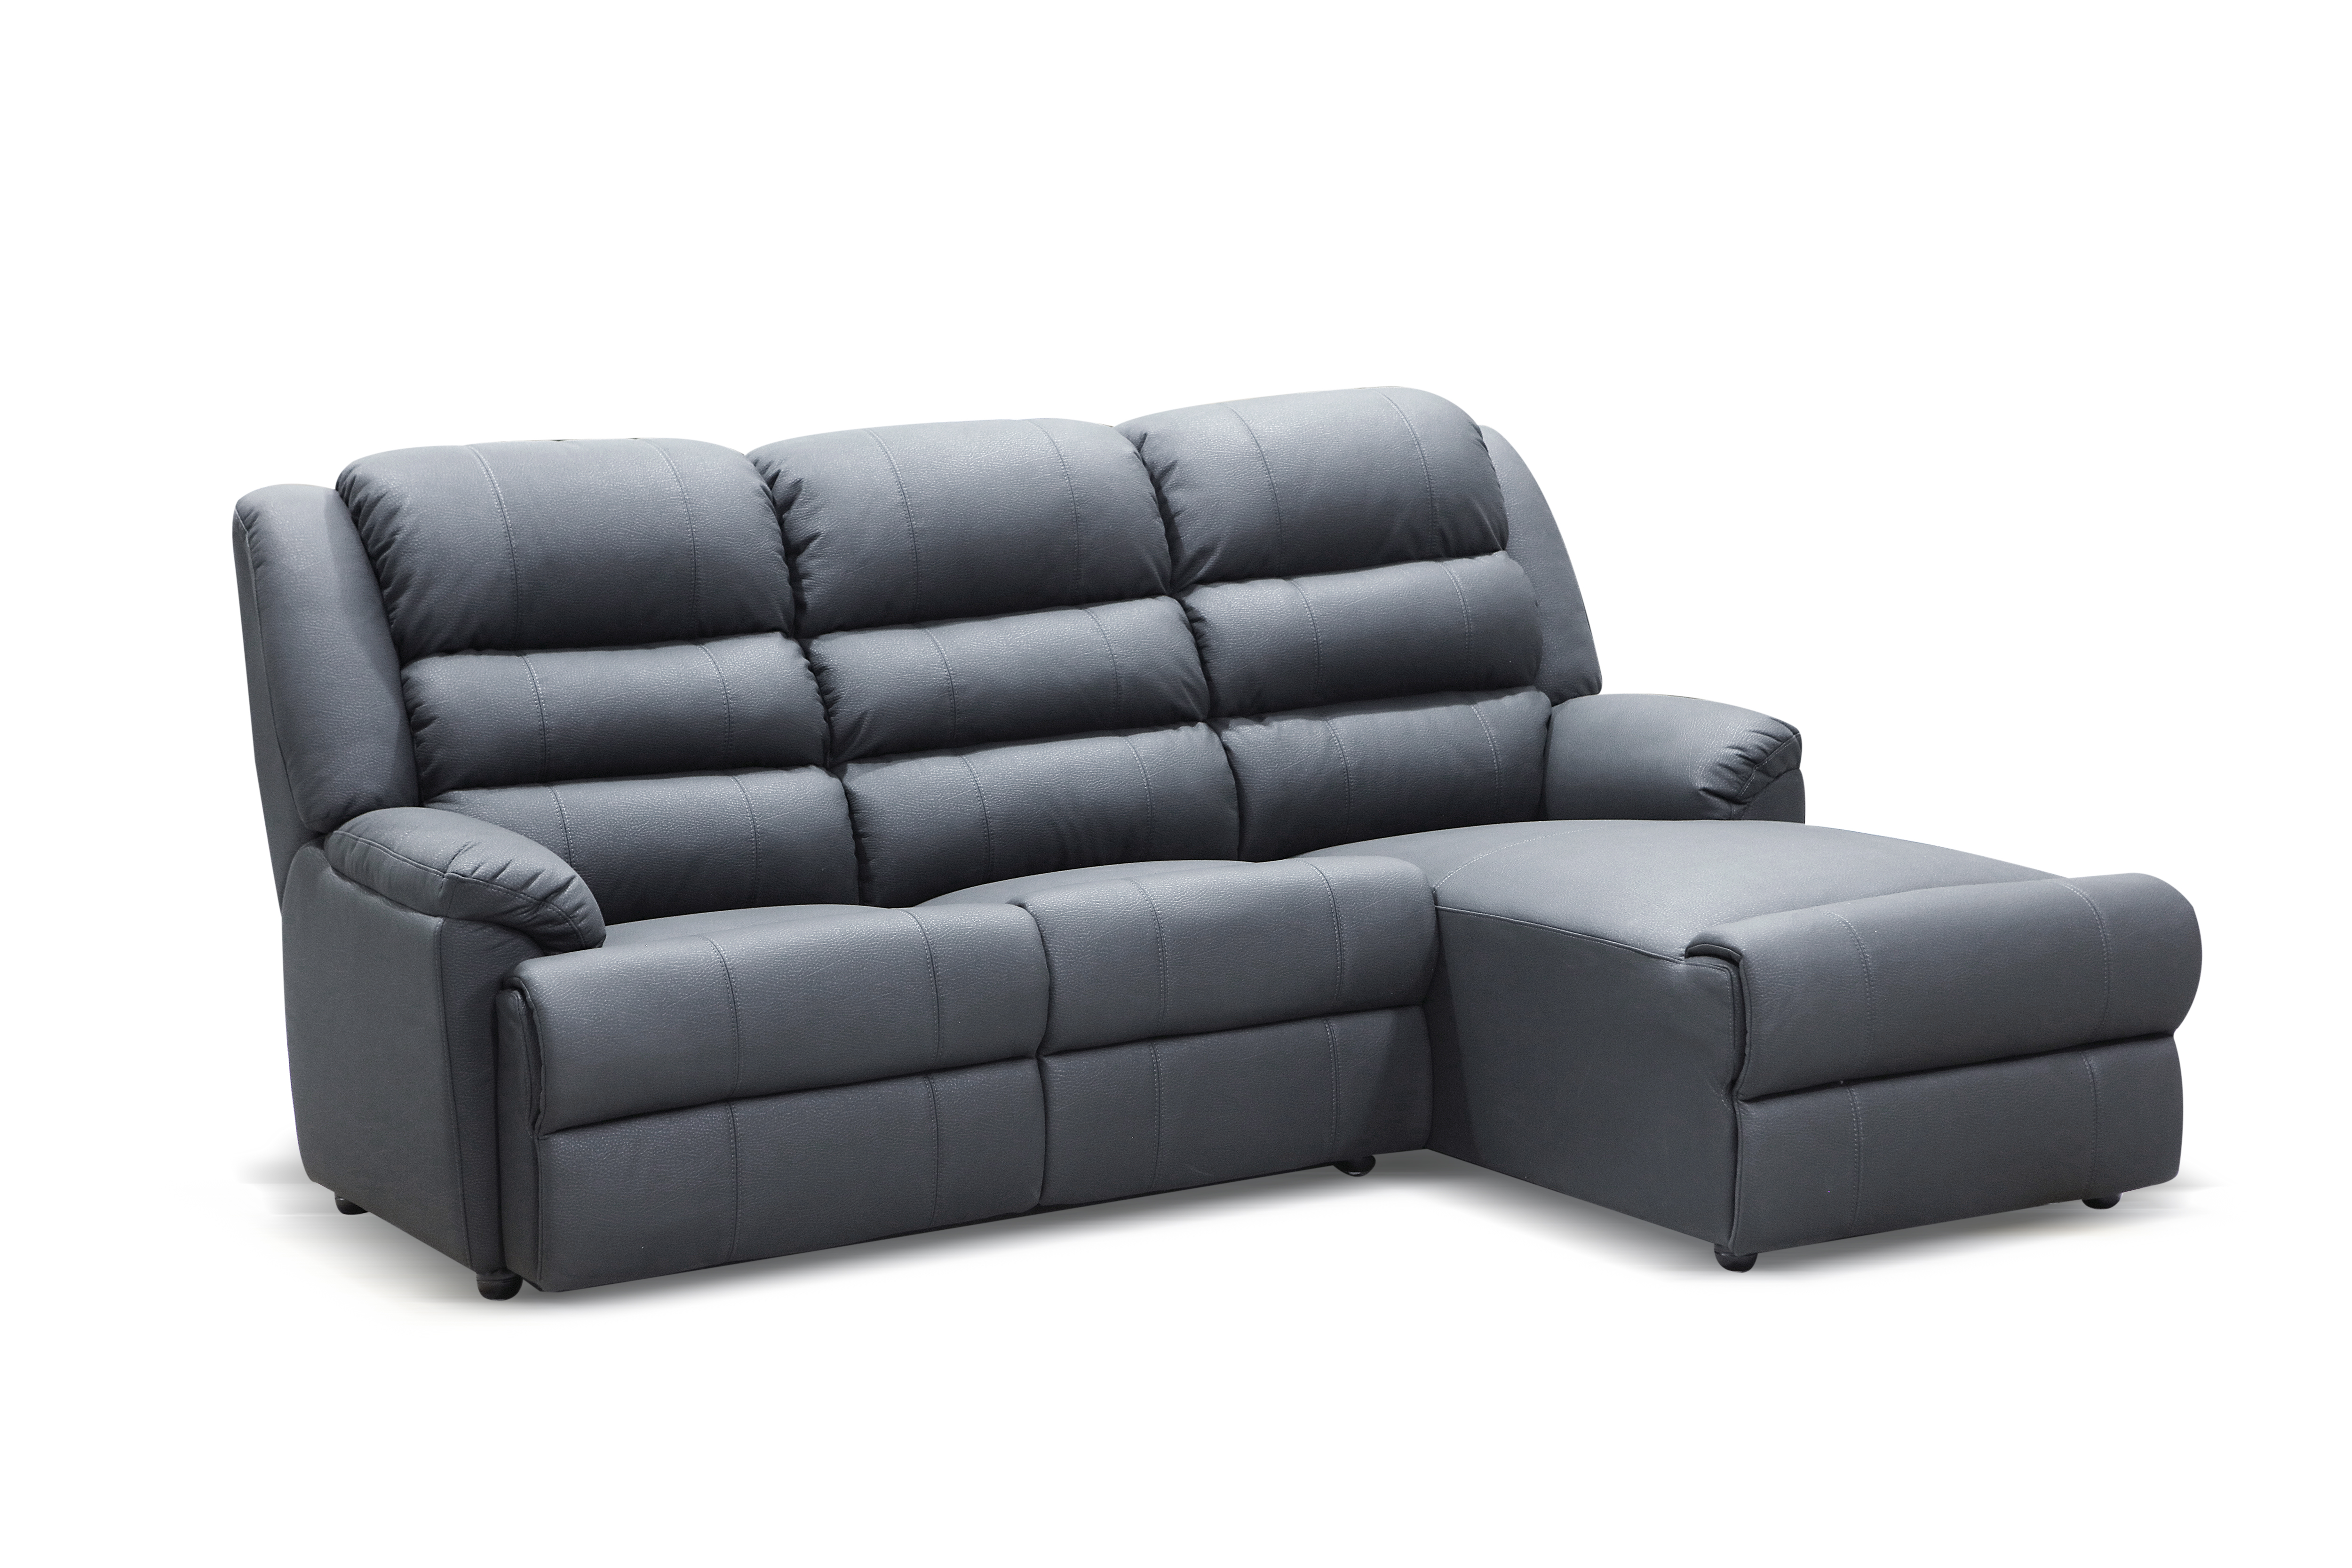 Summitt - 3 Seater Chaise Charcoal 3